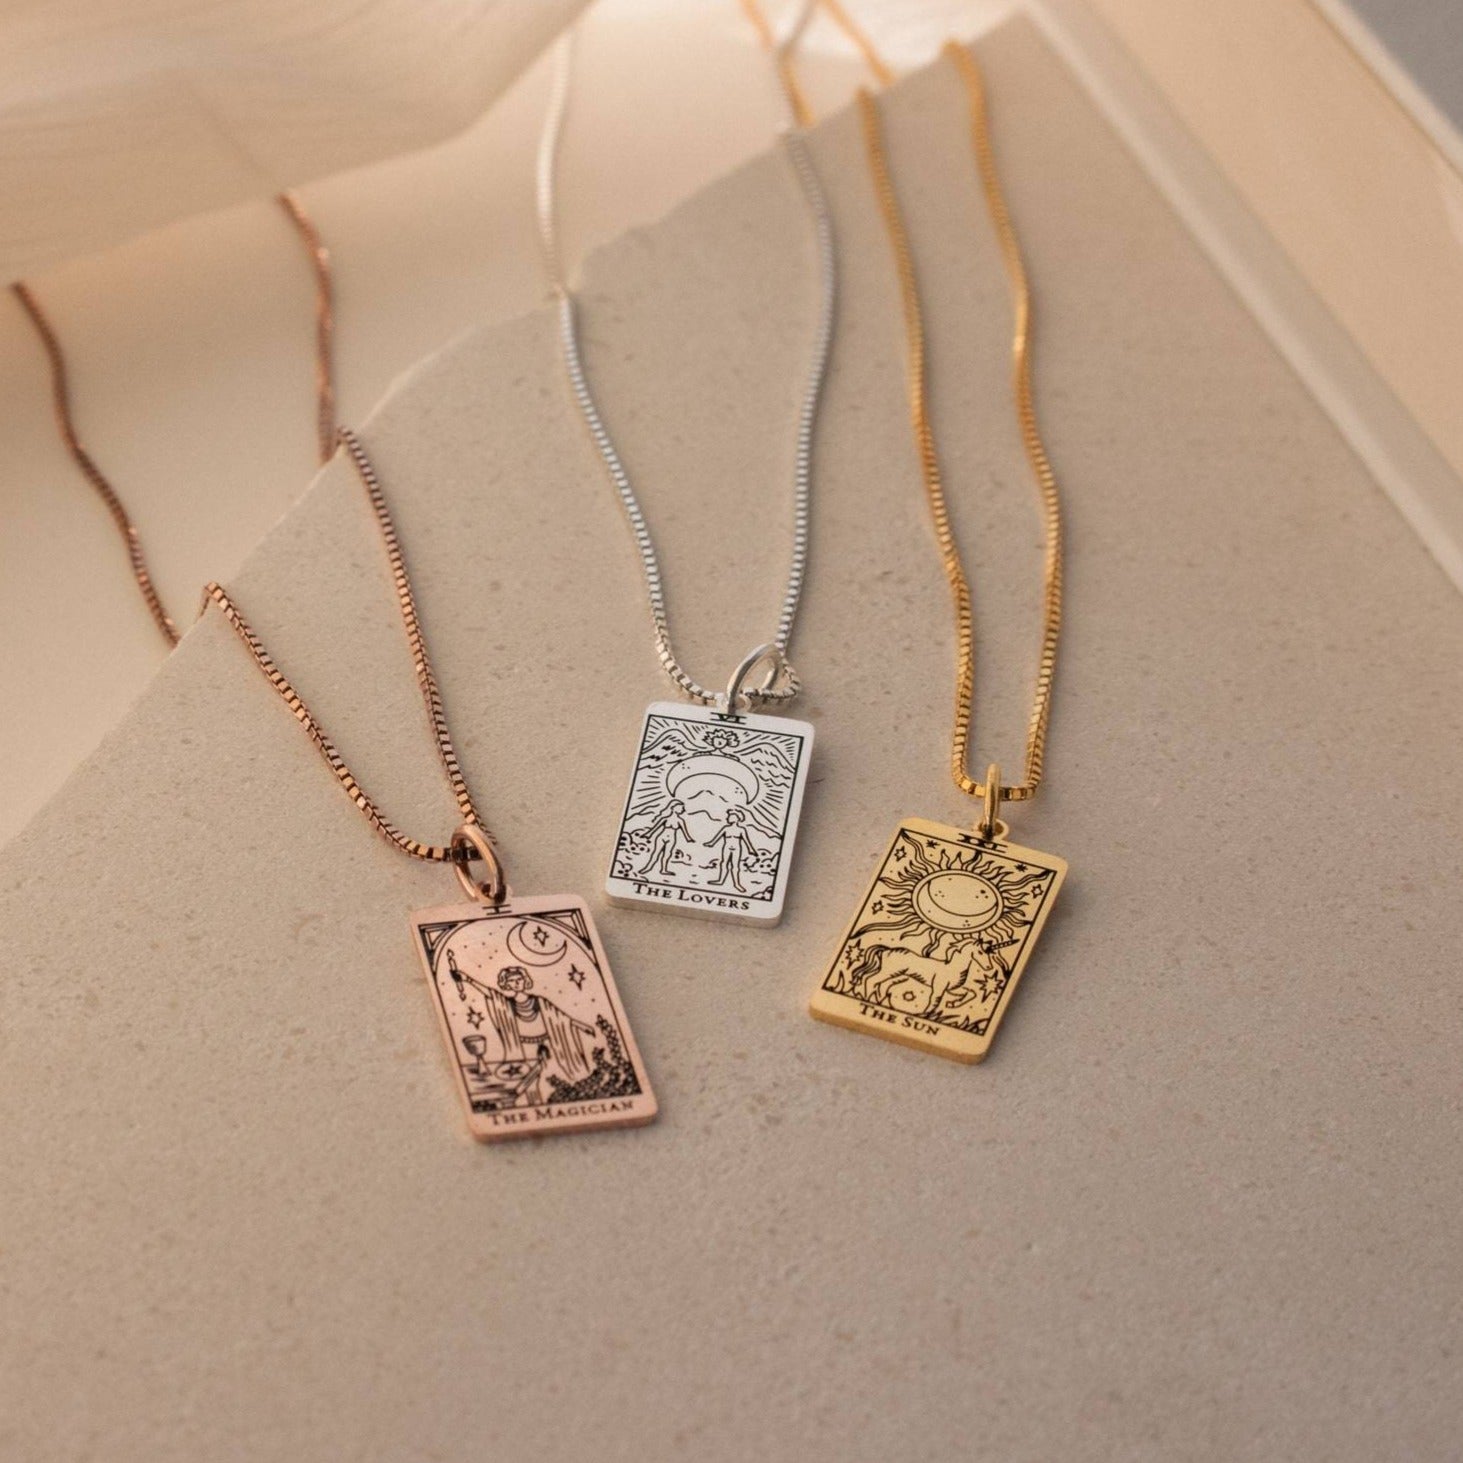 Bronze Sun Tarot Card Necklace with Gold Fill Chain